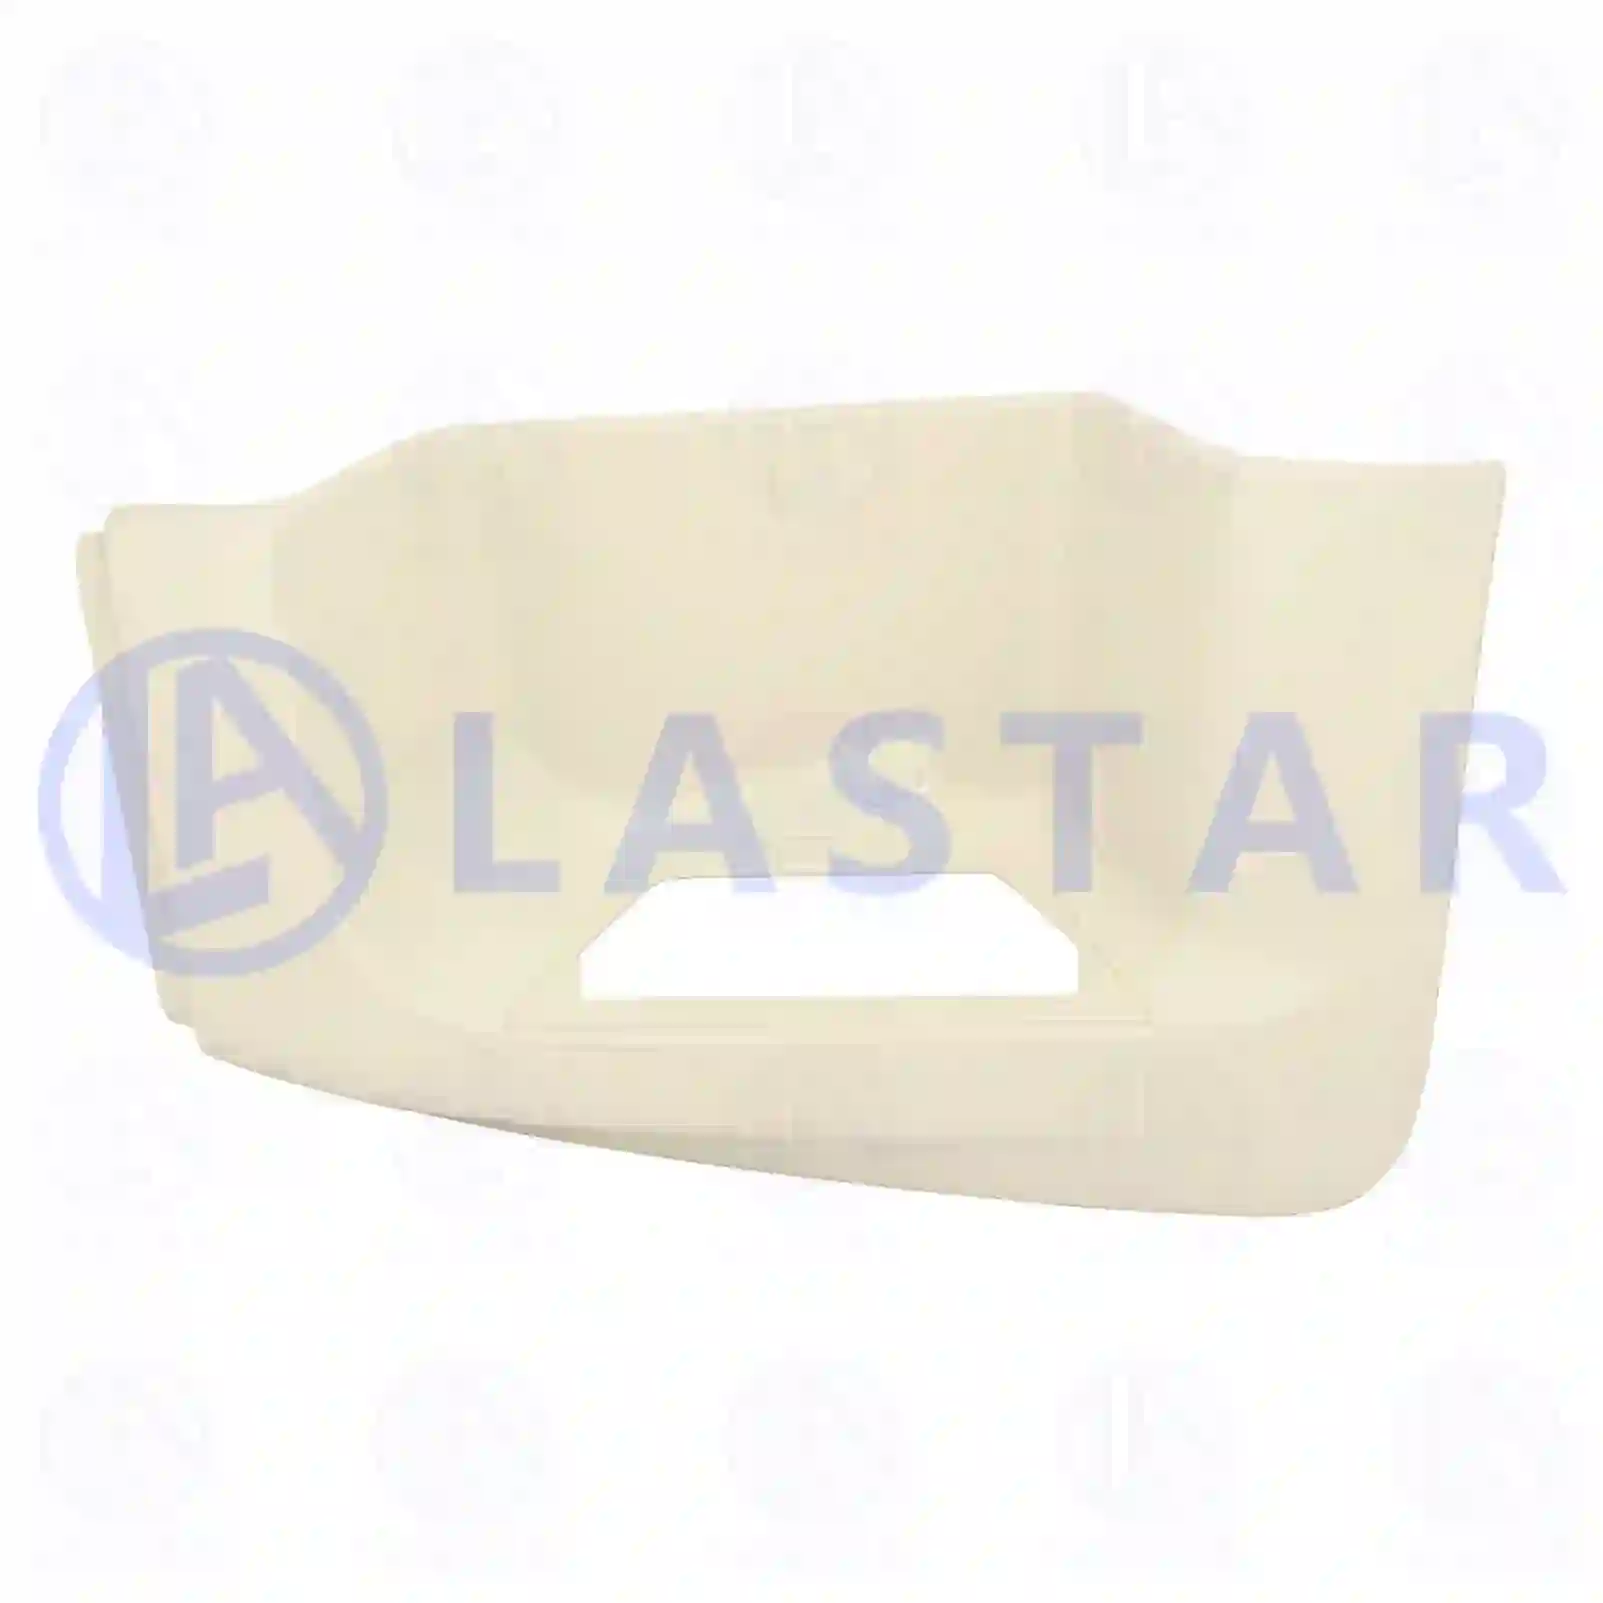 Step well case, left, white, 77719745, 1295732, ZG61204-0008 ||  77719745 Lastar Spare Part | Truck Spare Parts, Auotomotive Spare Parts Step well case, left, white, 77719745, 1295732, ZG61204-0008 ||  77719745 Lastar Spare Part | Truck Spare Parts, Auotomotive Spare Parts